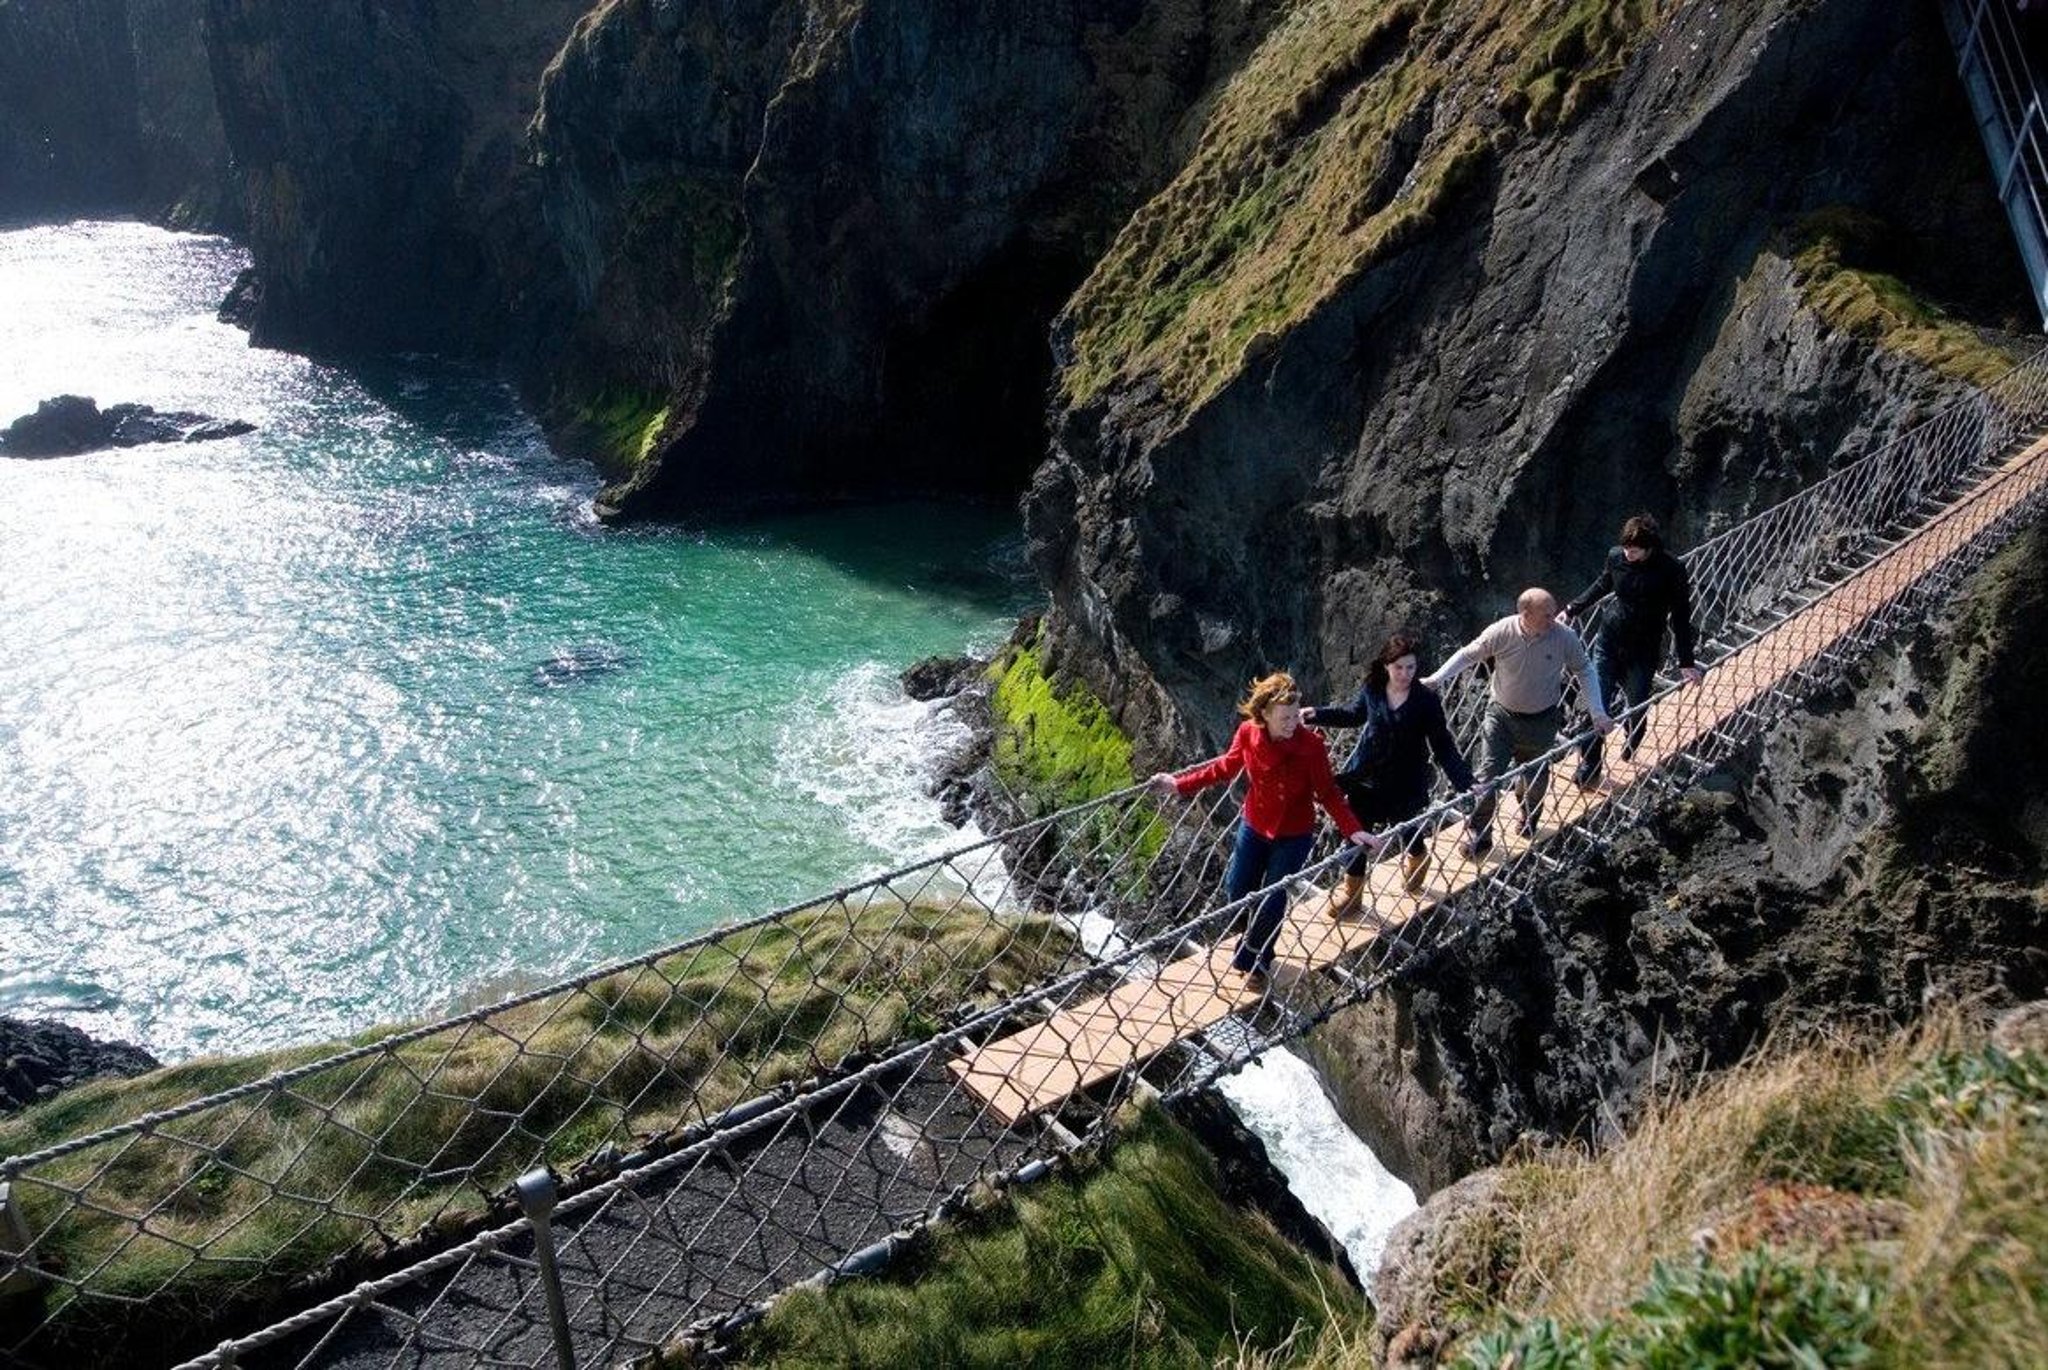 Carrick-a-rede rope bridge to remain shut over Easter